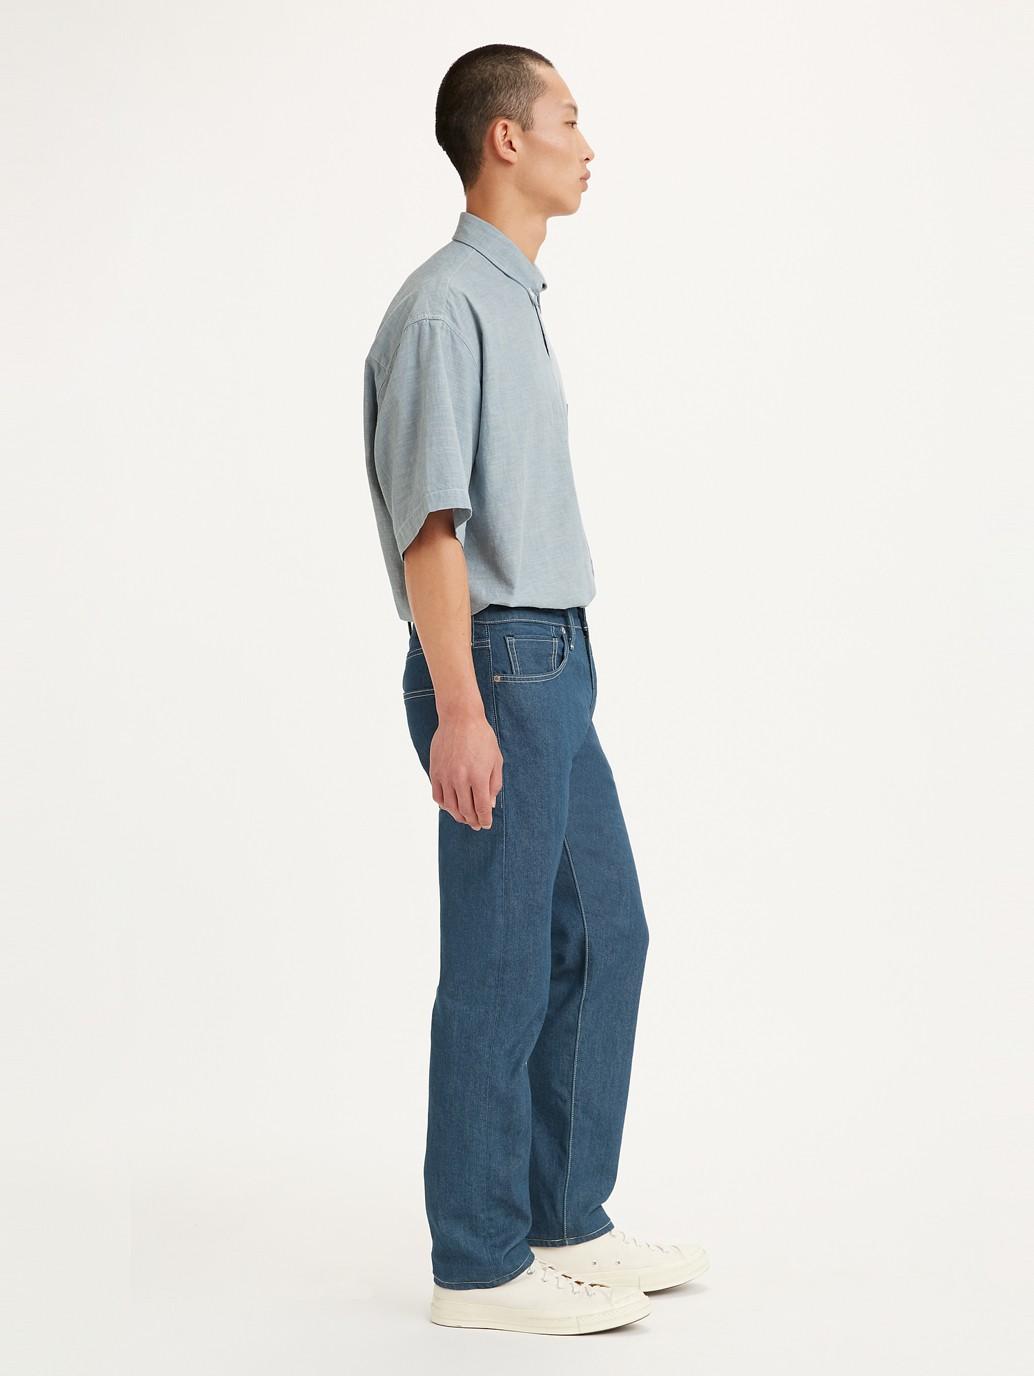 Buy Levi's® Crafted® Men's 502™ Taper Jeans | Levi's® Official Online Store PH